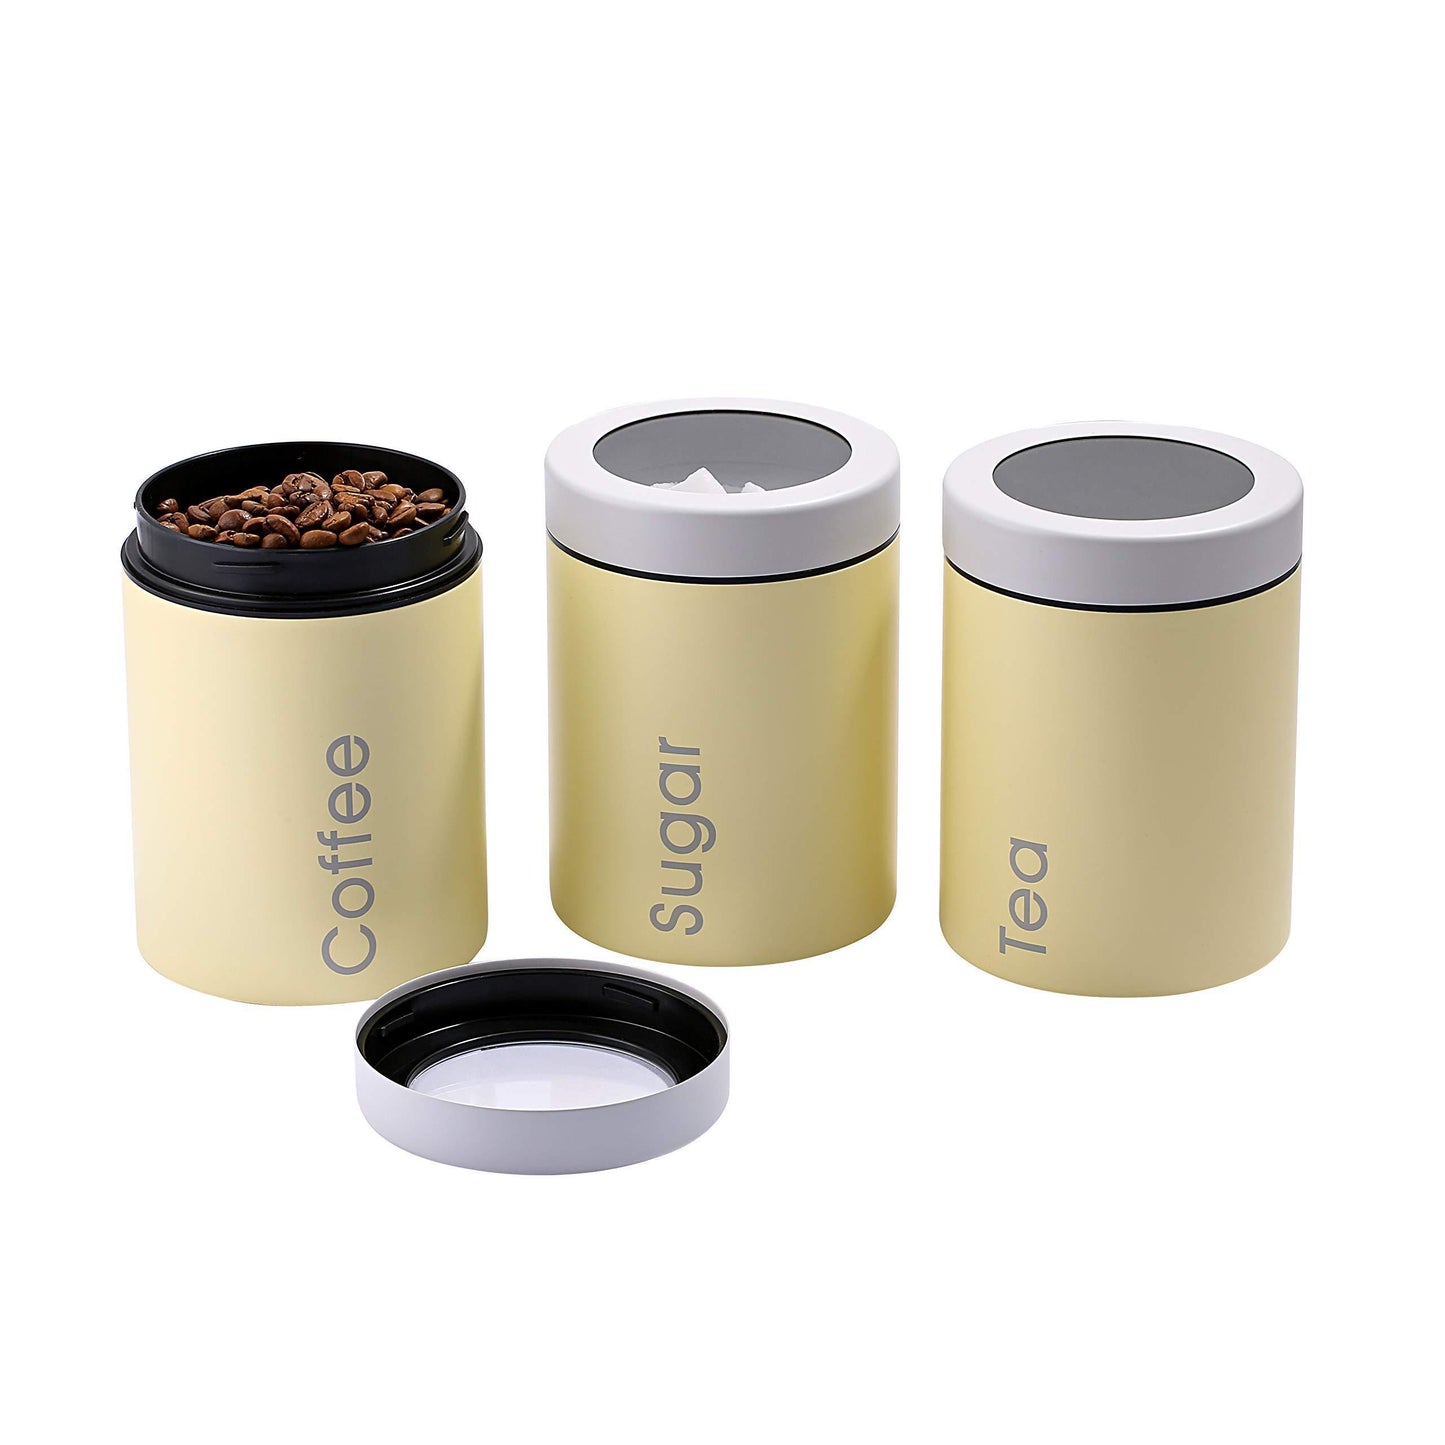 New adzukio modern stylish canisters sets for kitchen counter 3 piece canister for tea sugar coffee food storage container multipurpose light yellow